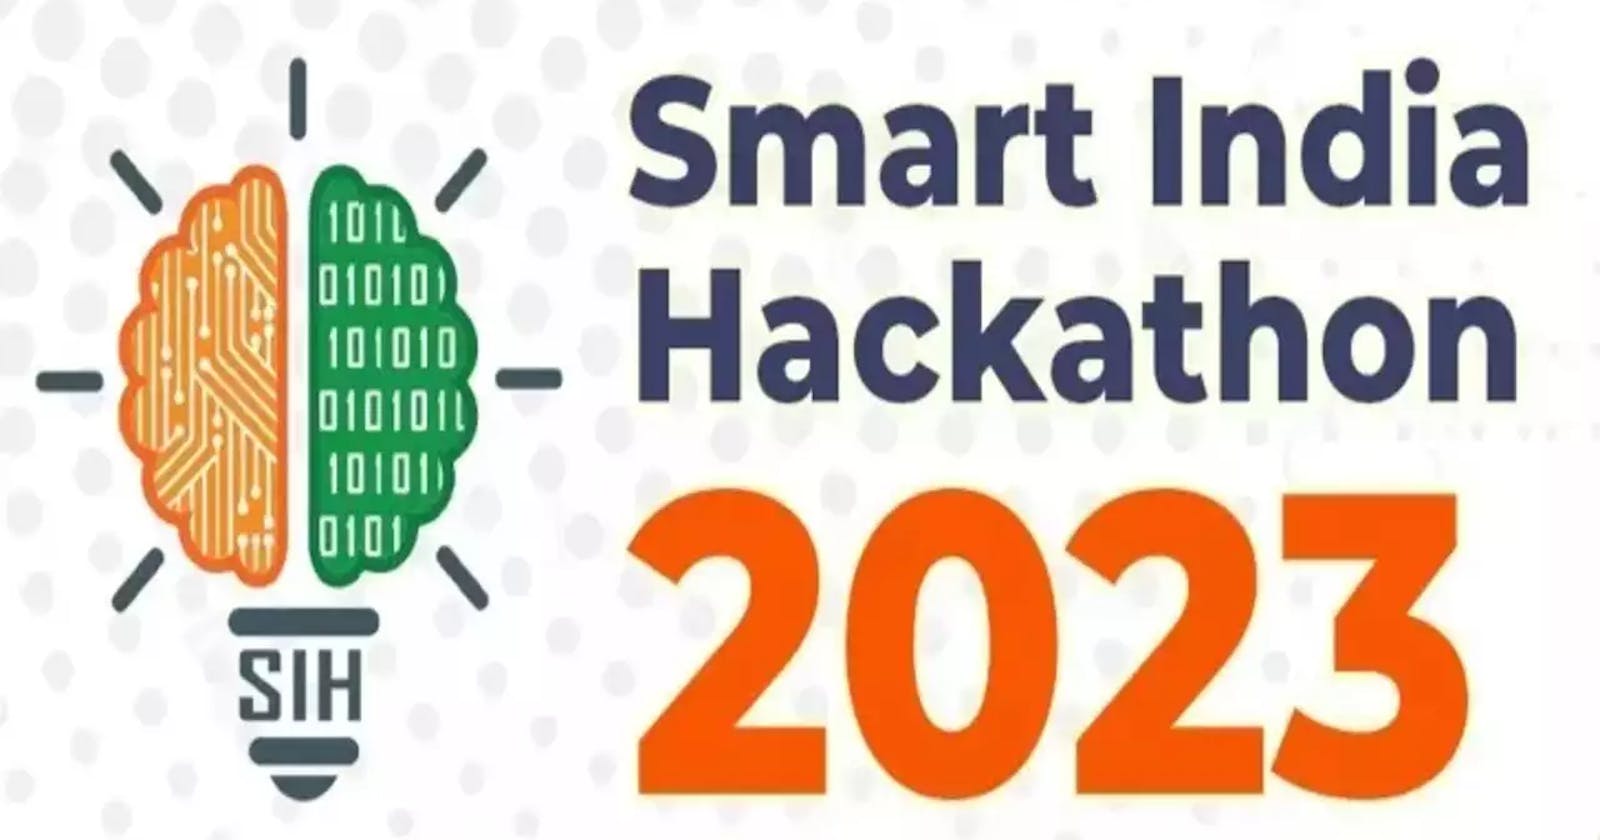 Smart India Hackathon | Finalist Experience and advice